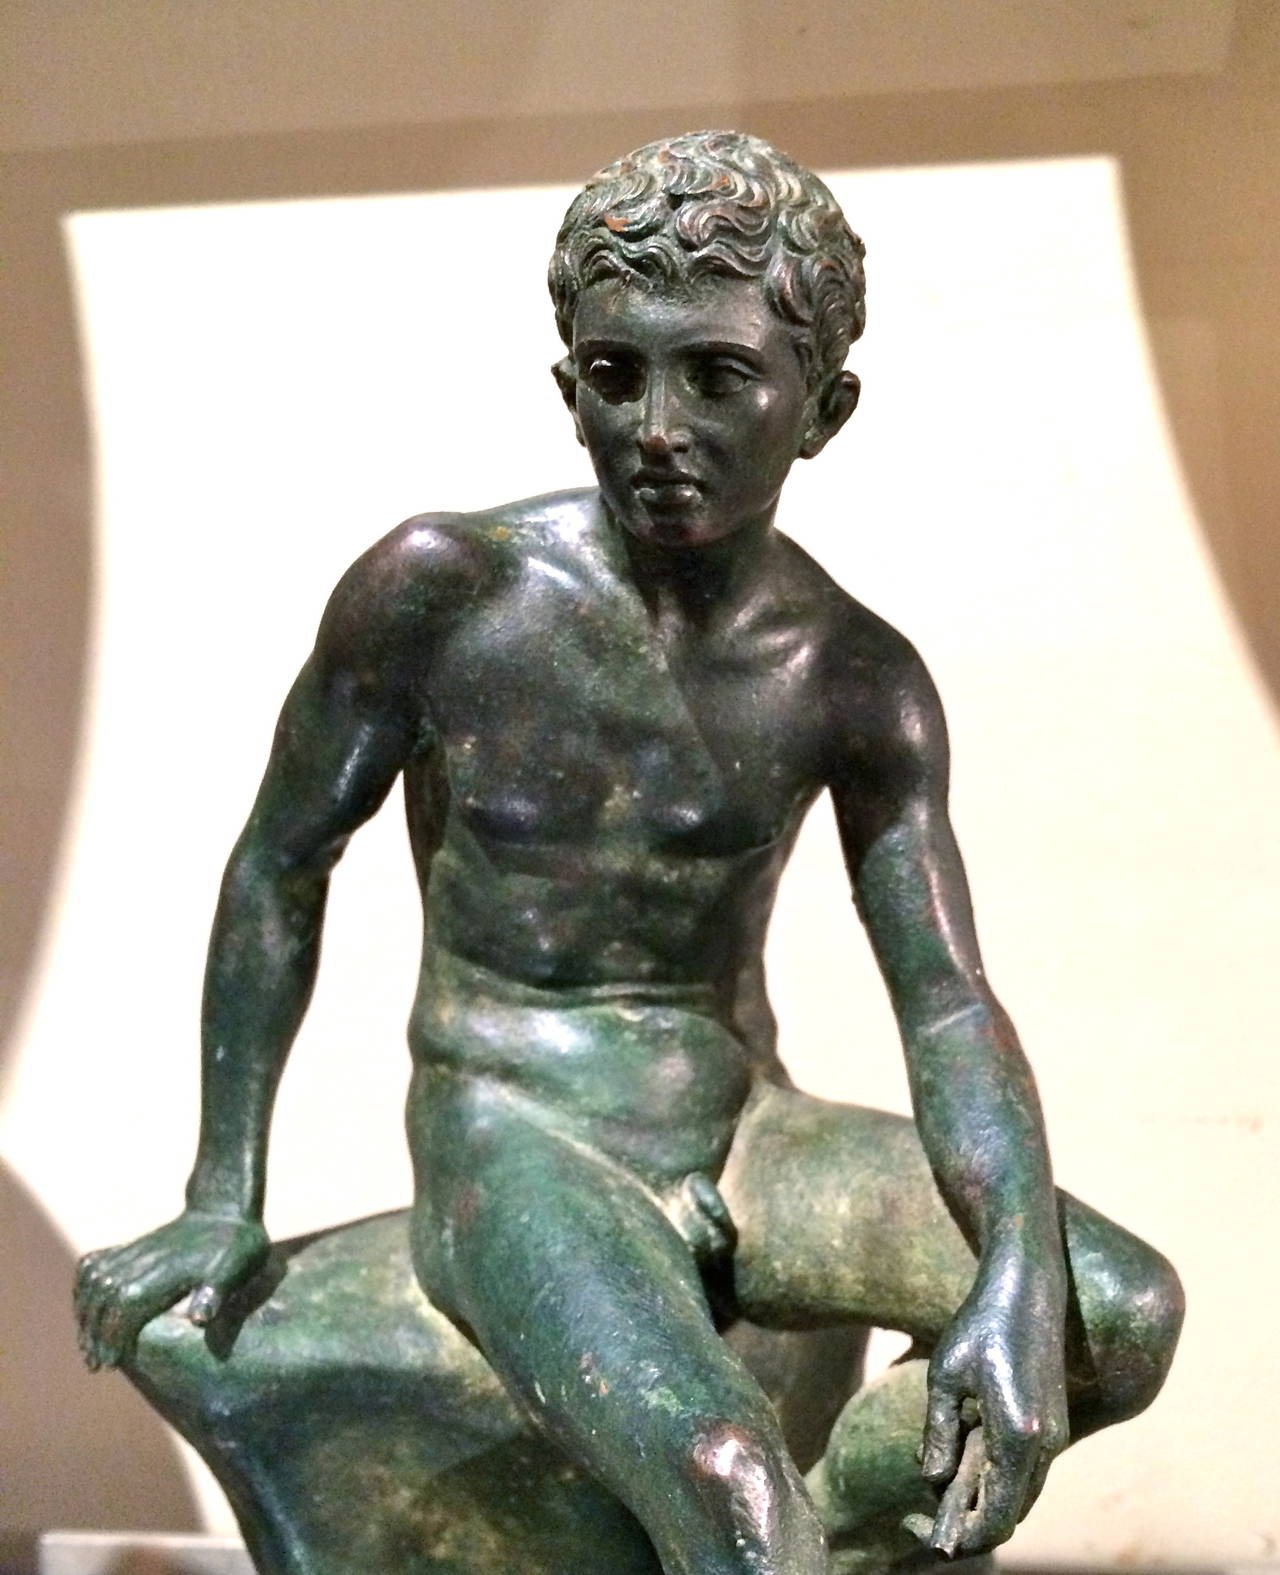 A very fine cast of the 'Seated Hermes,' after the original excavated in the 18th century. Known as the god Mercury to the Romans. 

The bronze seated Hermes, found at the Villa of the Papyri in Herculaneum in 1758, is at the National